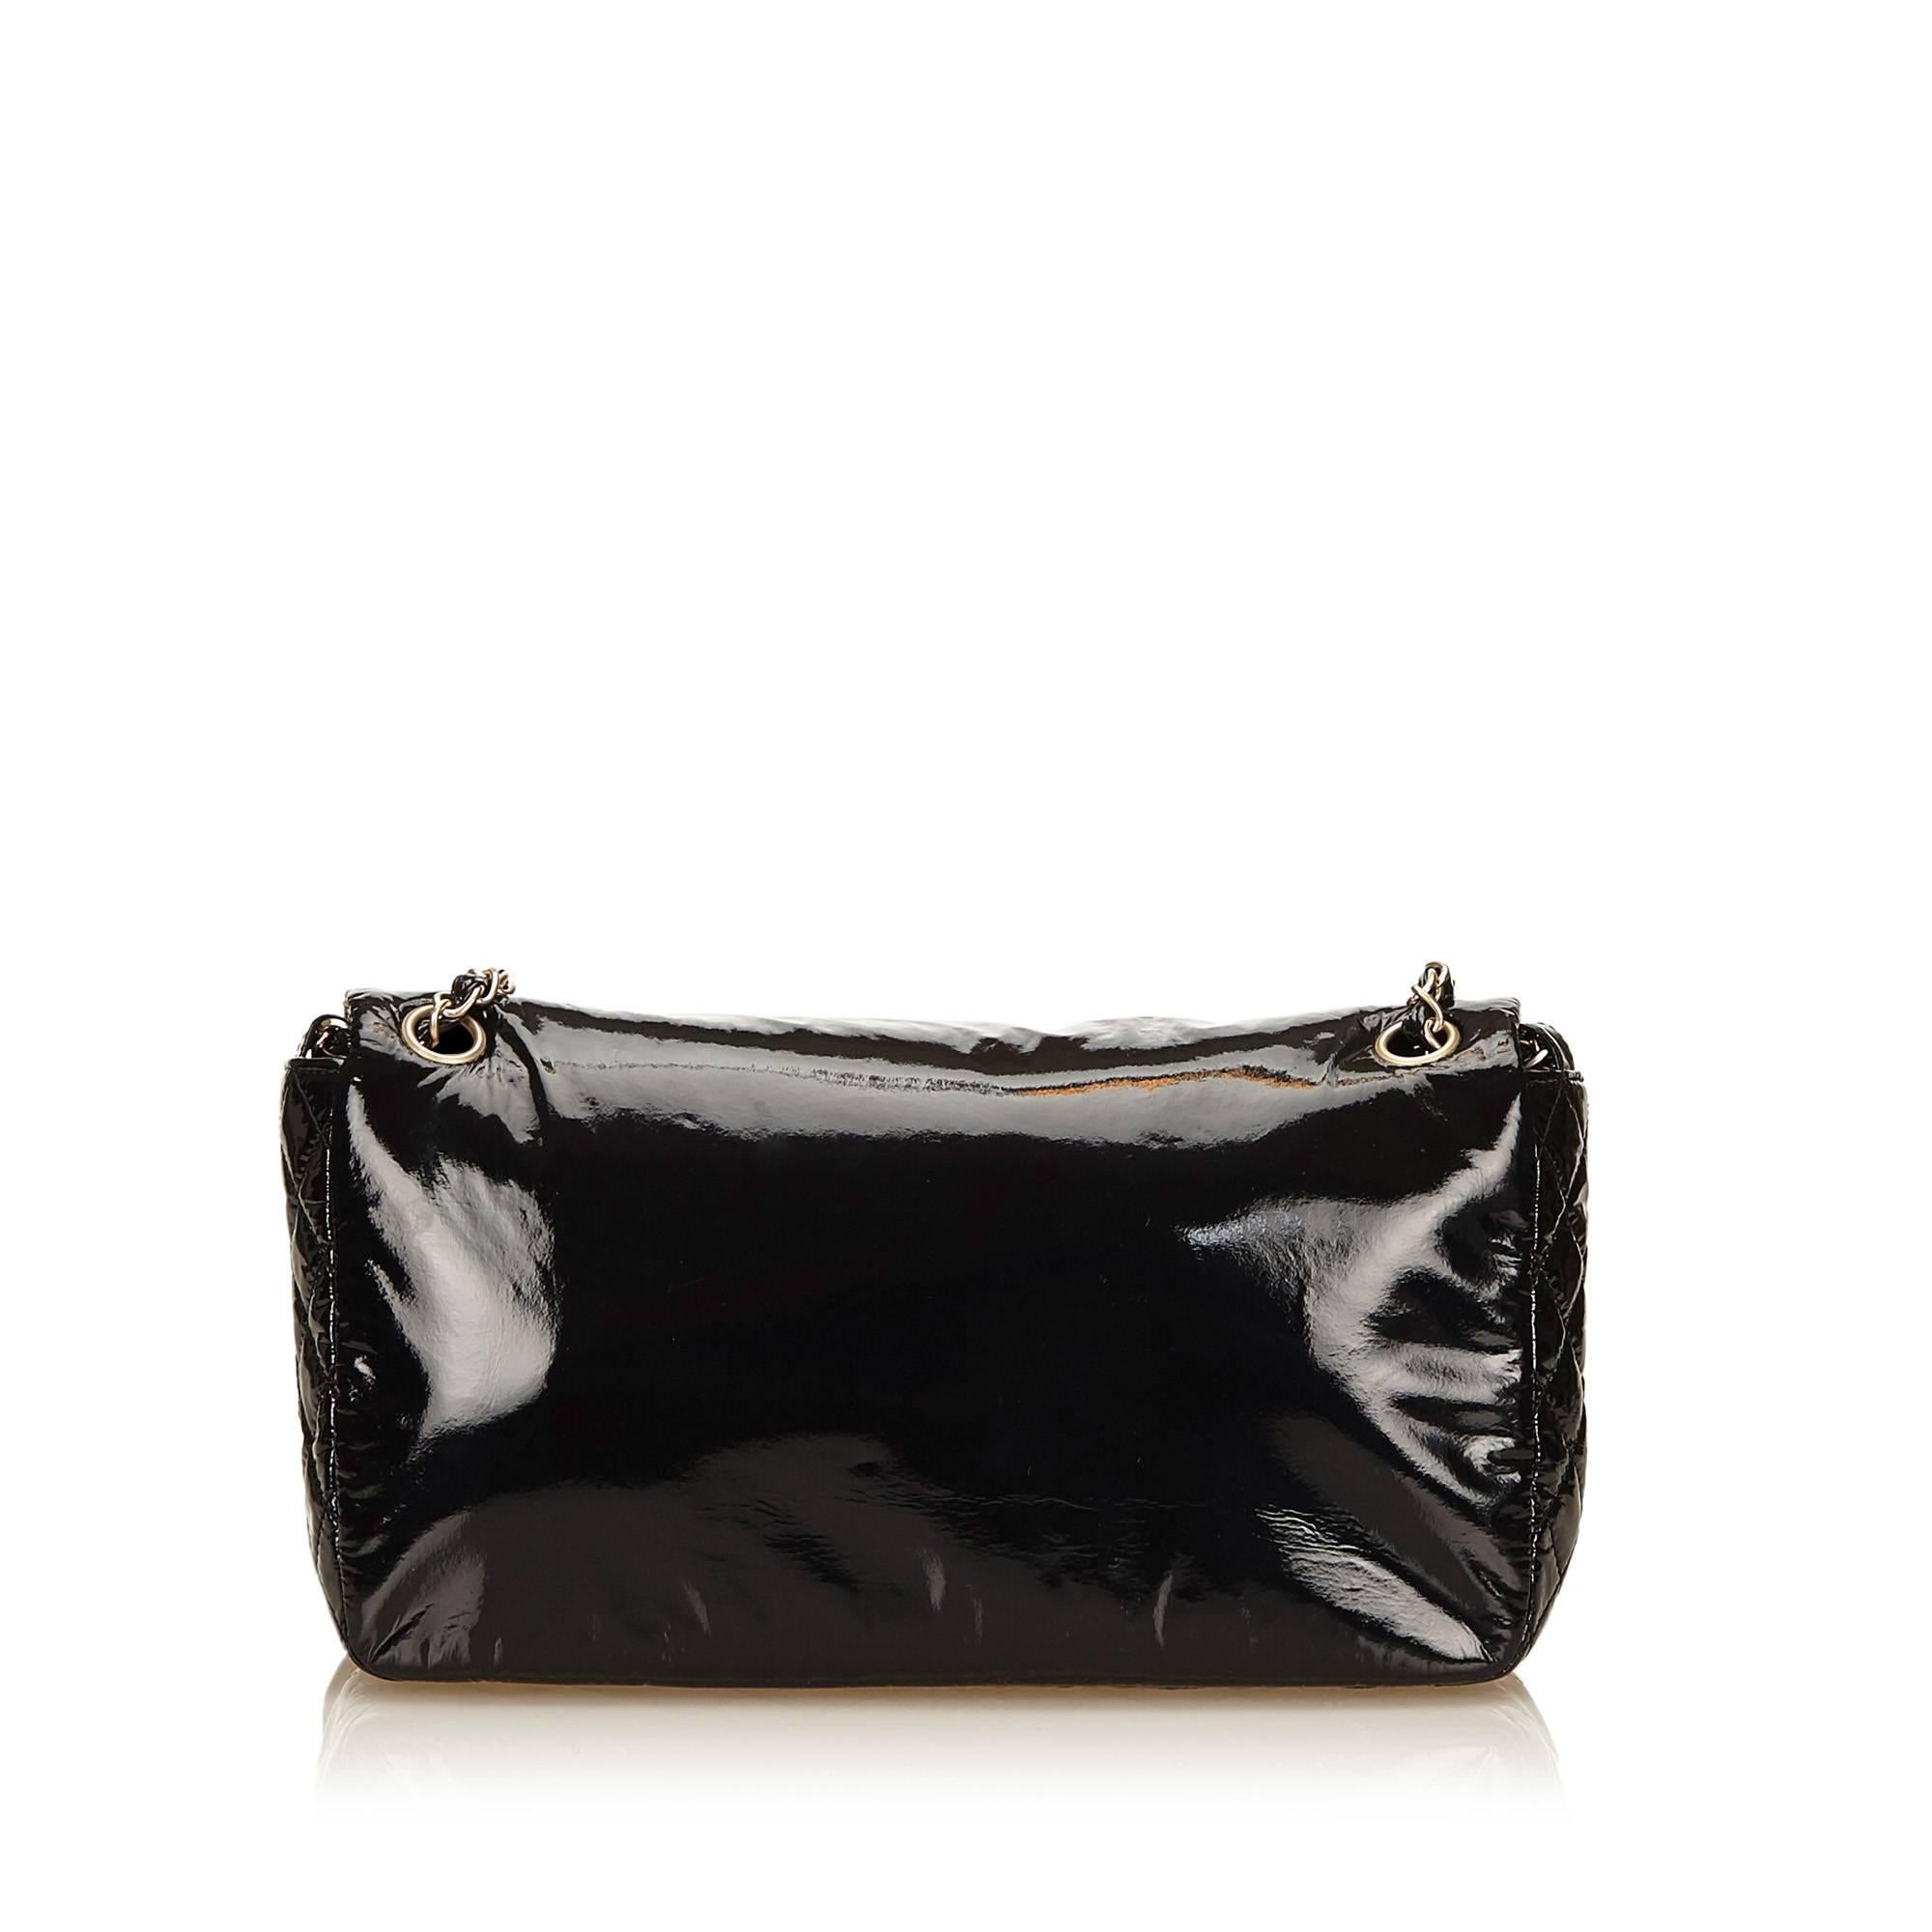 Chanel Black Patent Leather 